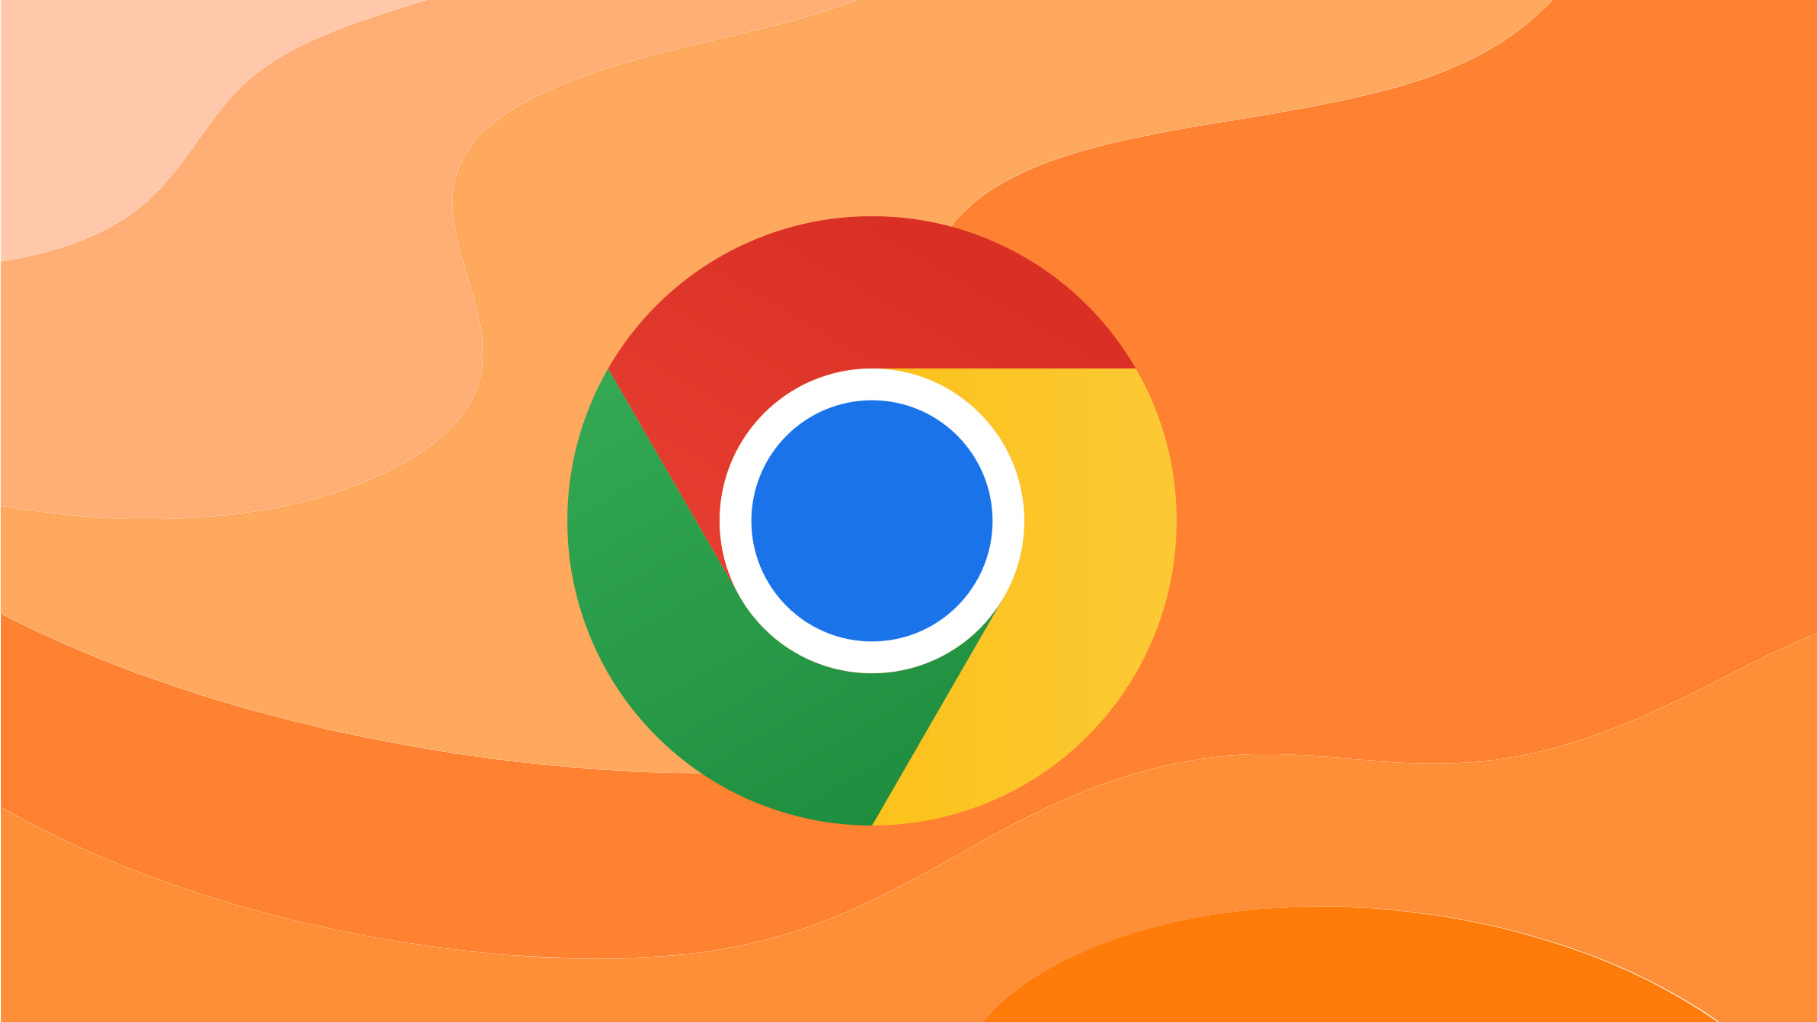 chrome new tab page brings navigational tweaks and slight design changes